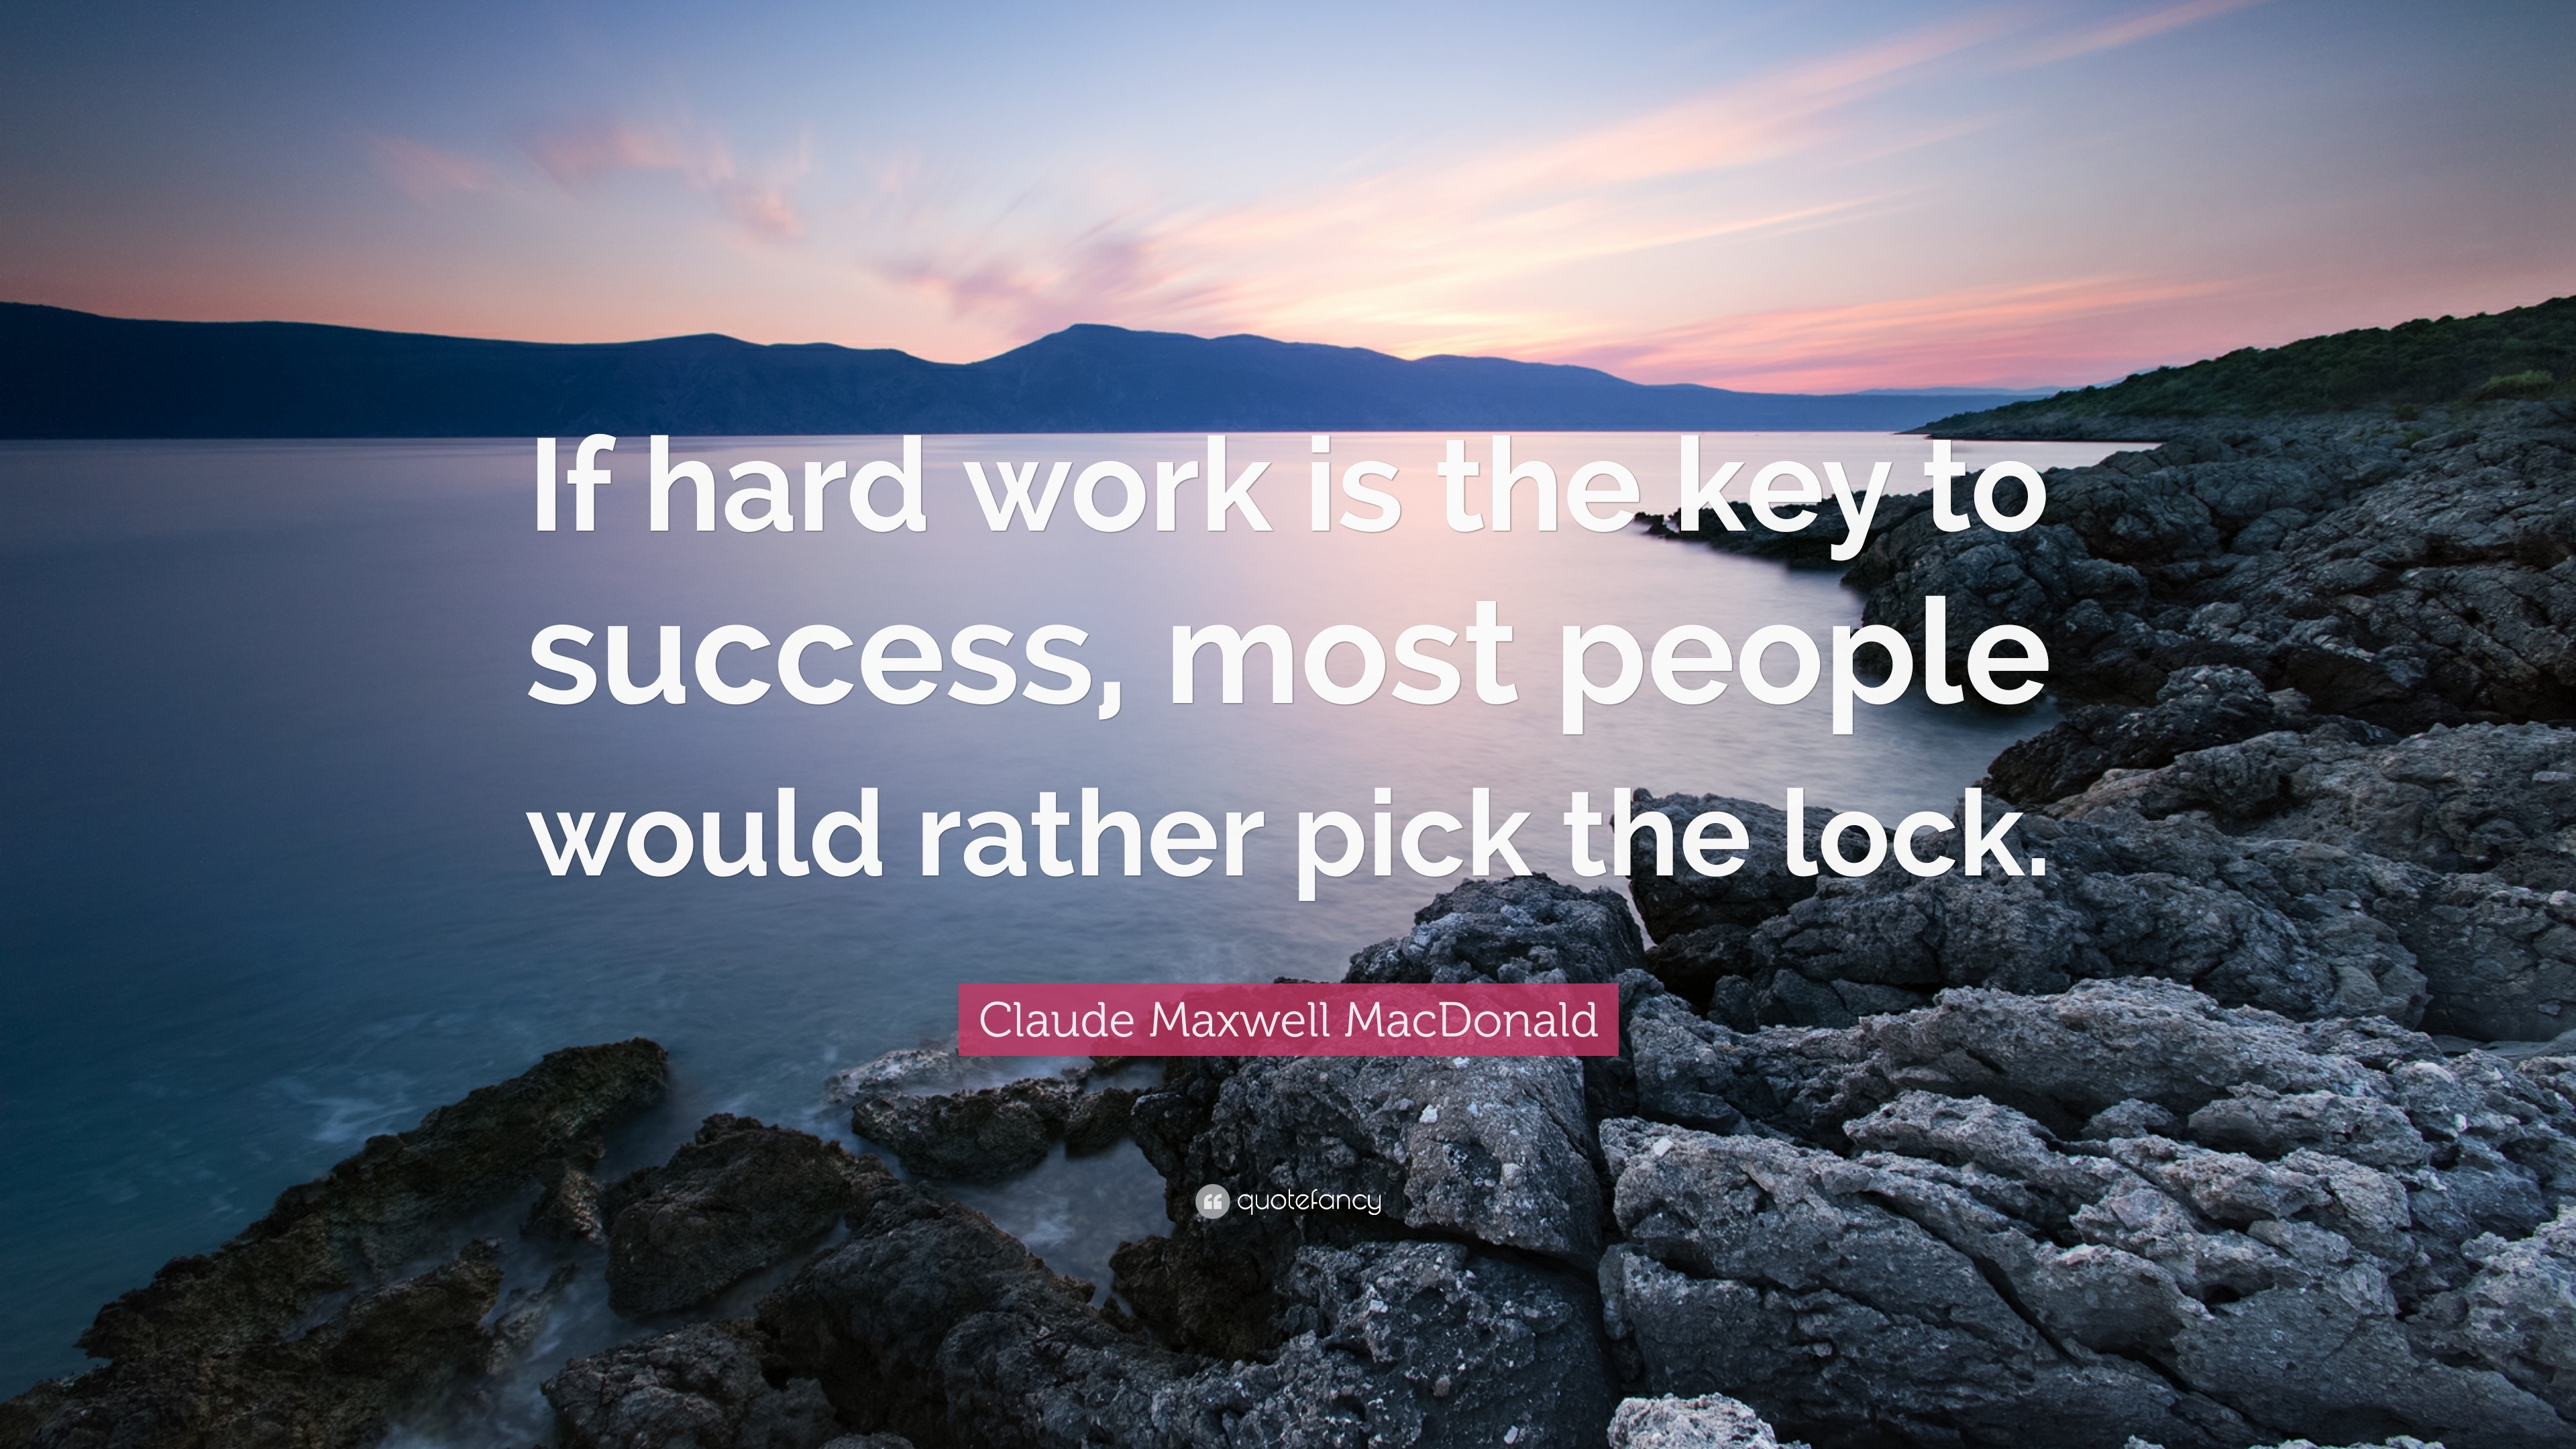 Claude Maxwell MacDonald Quote: “If hard work is the key to success ...